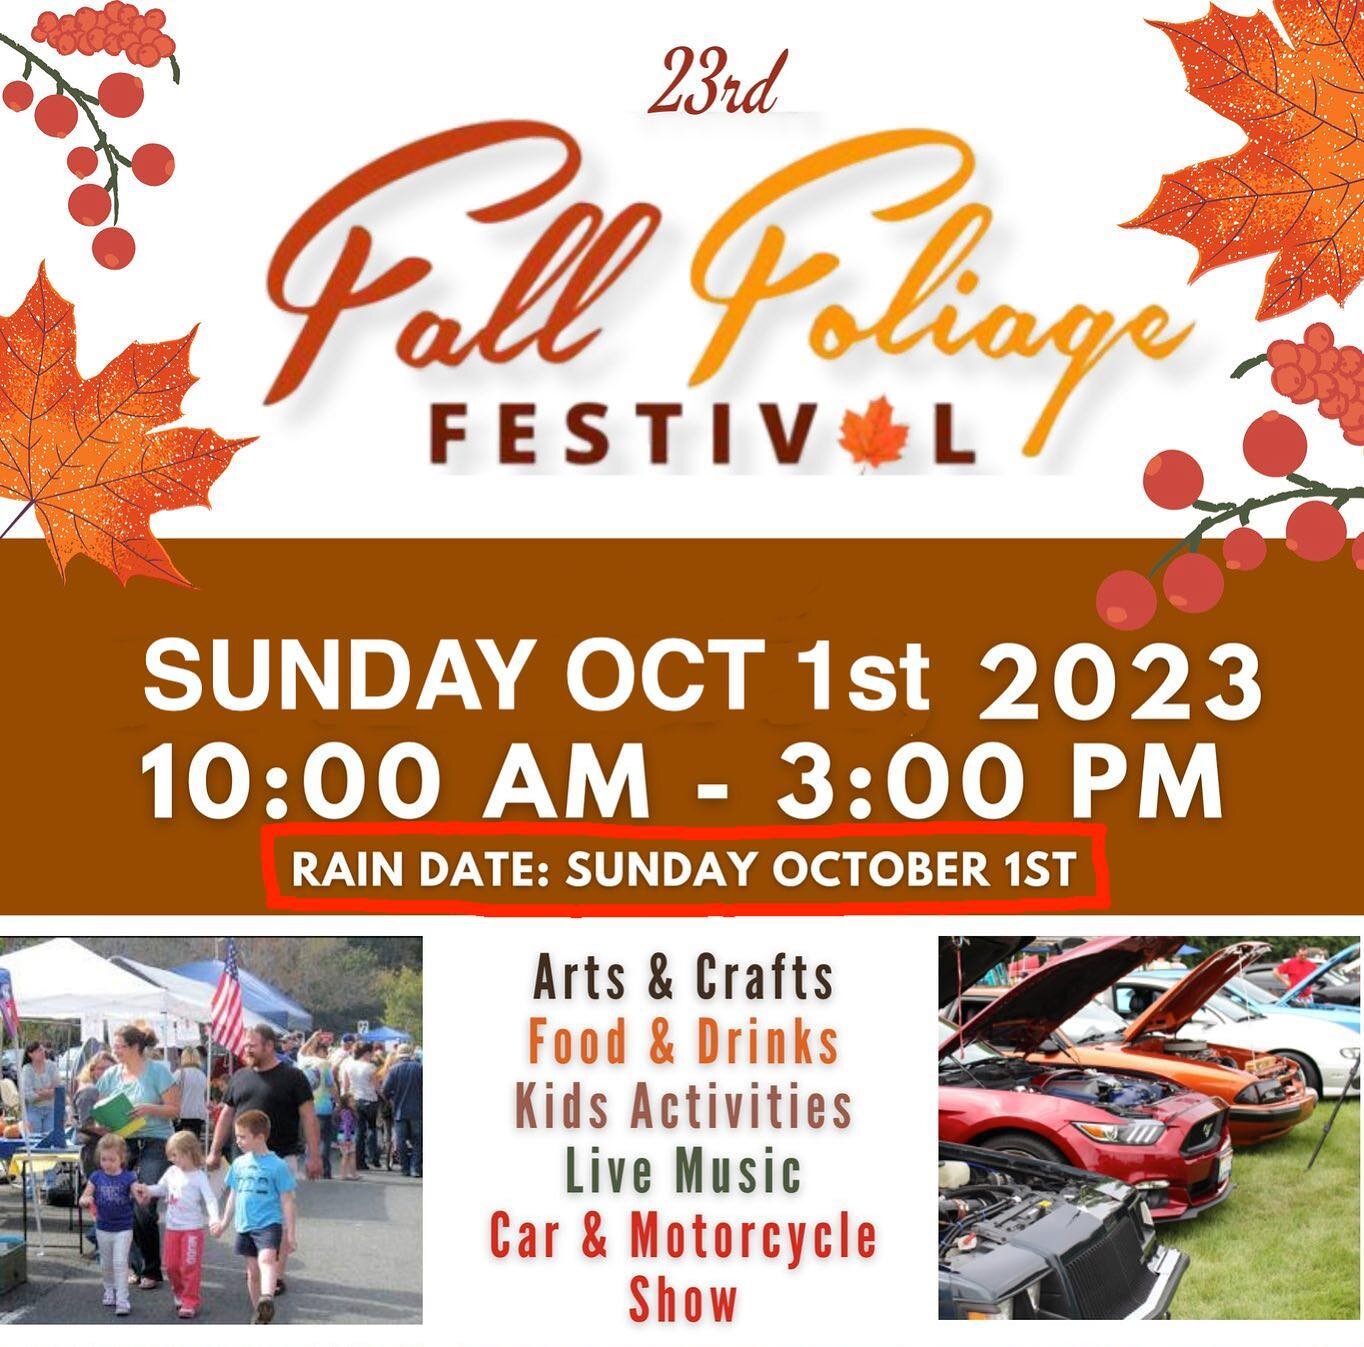 We&rsquo;re excited to be joining the 23rd Fall Foliage Festival in Winchester/Winsted on Sunday, Oct 1st 10a-3p (the new rain date). Come see us at the ROOTED tent outside @rooted.market at 406 Main St. We&rsquo;ll be selling fresh veggies while sup